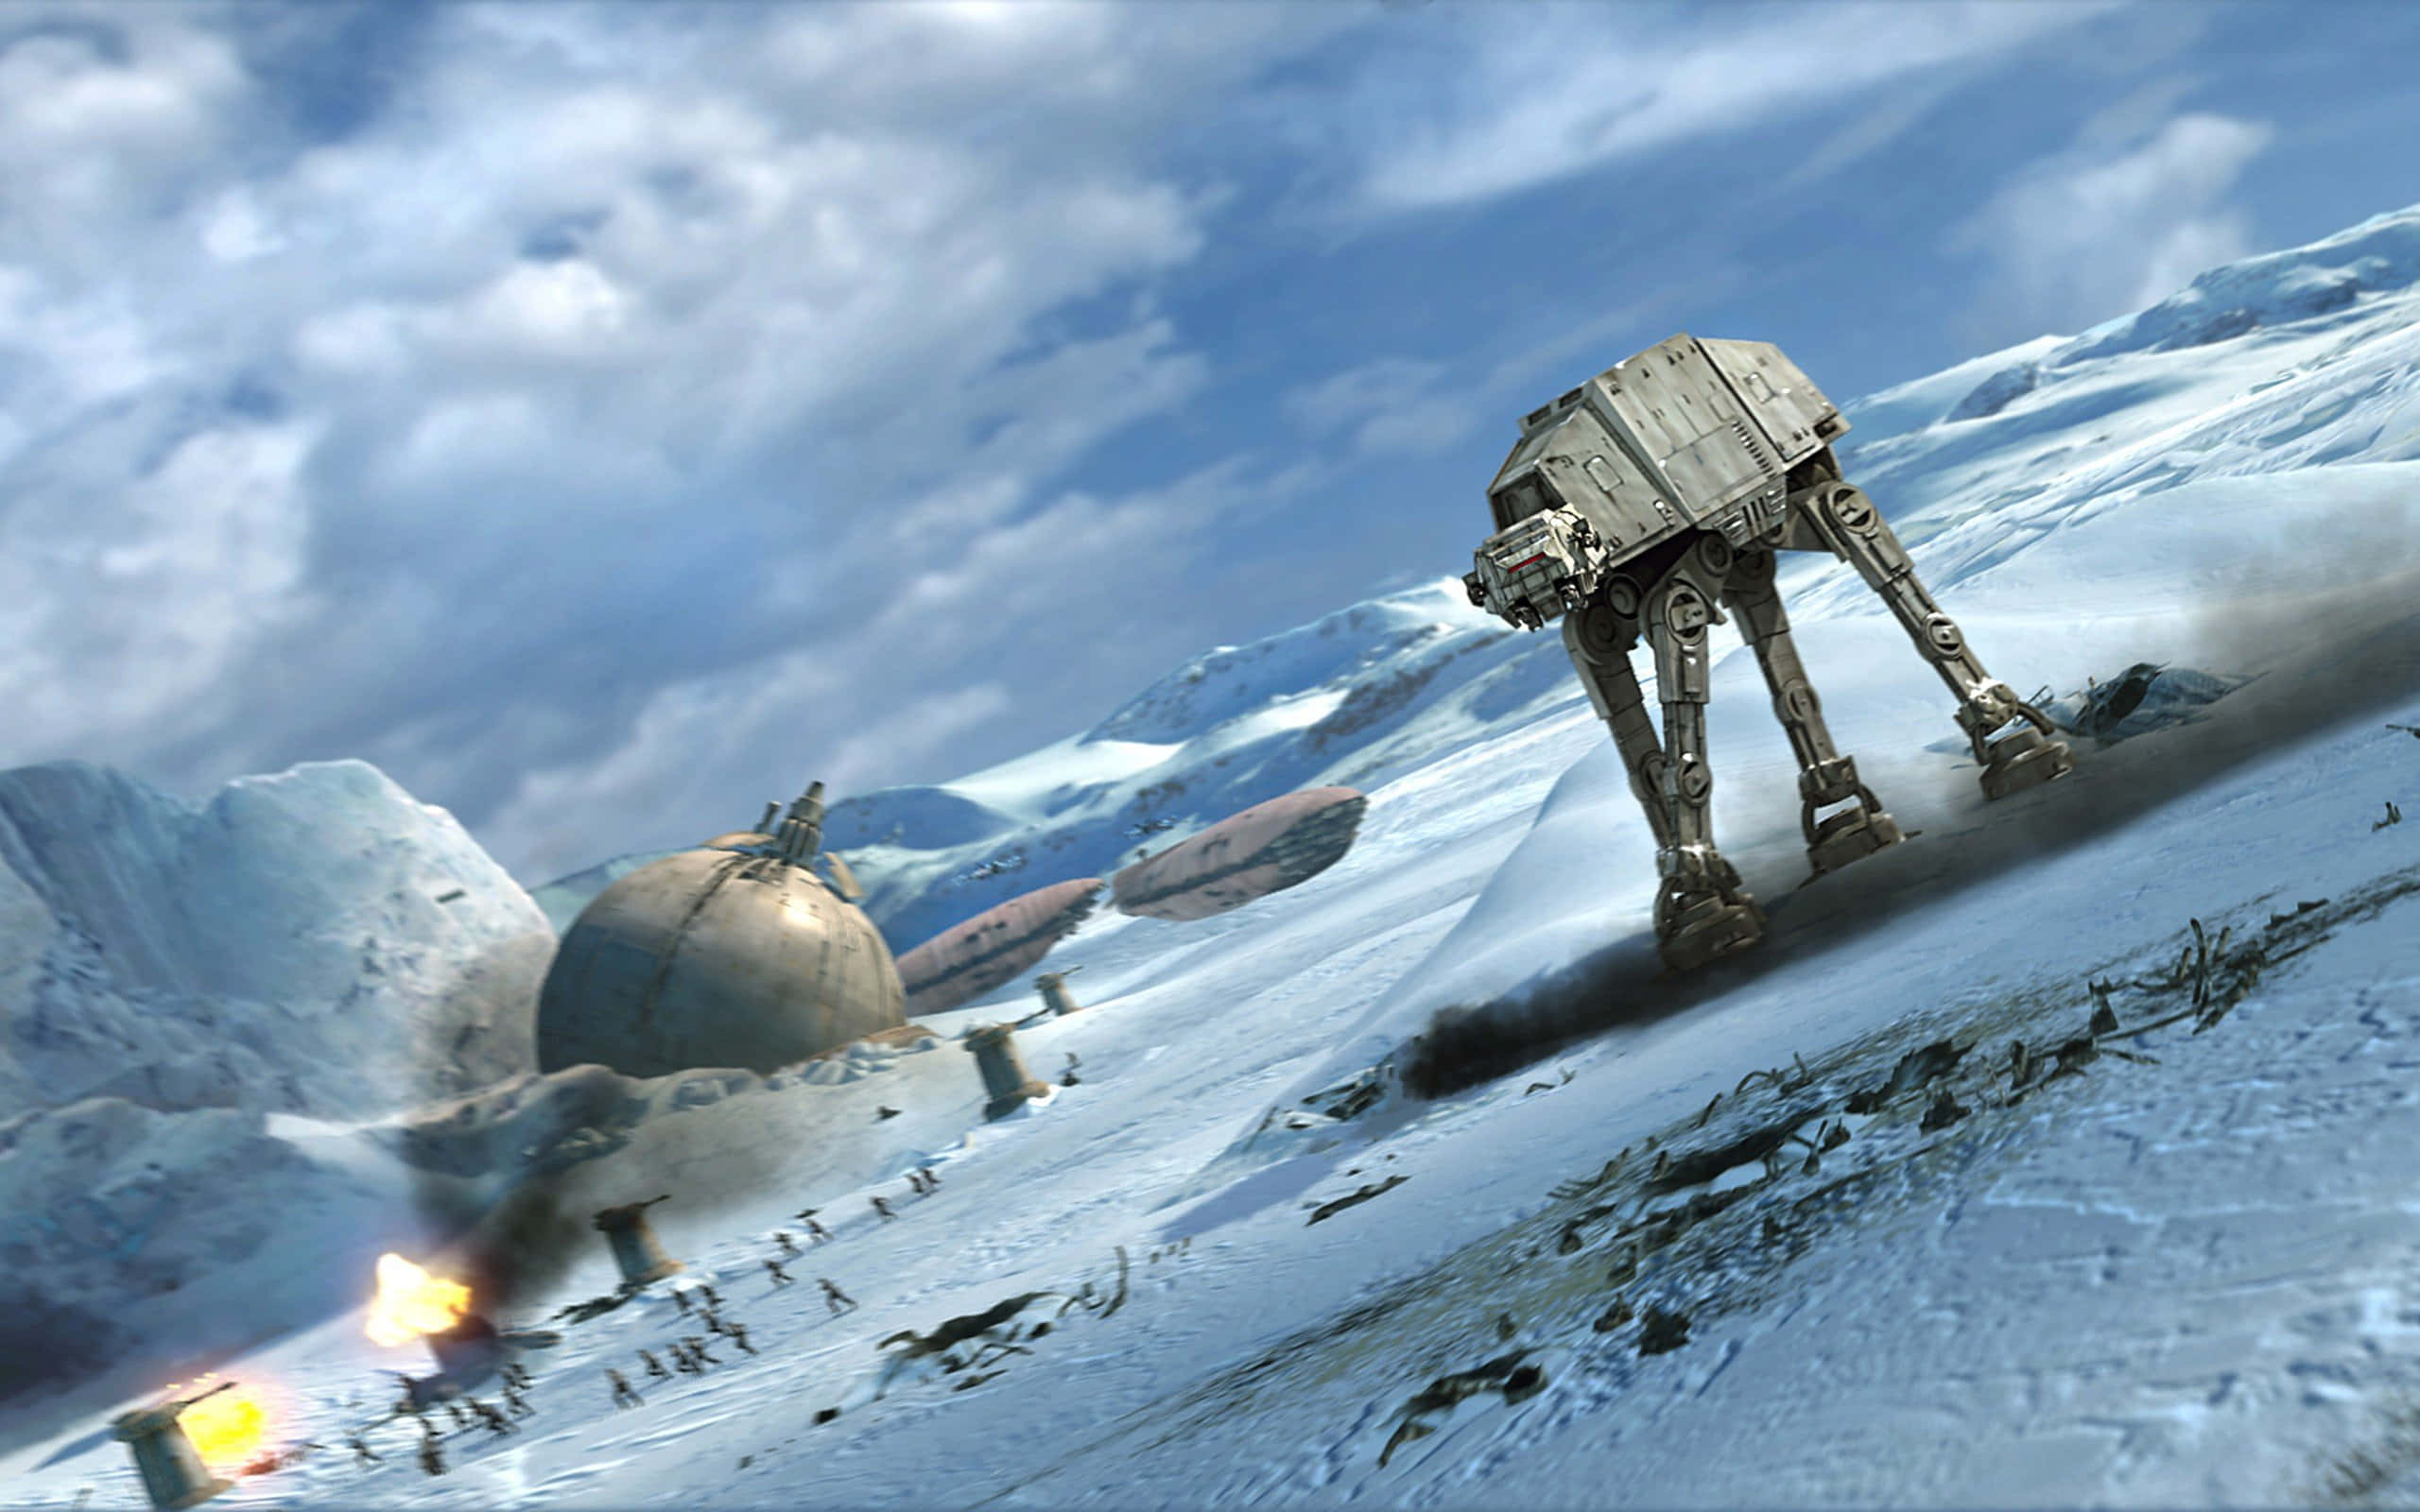 Rebel Alliance vs Empire in the Epic Battle of Hoth" Wallpaper